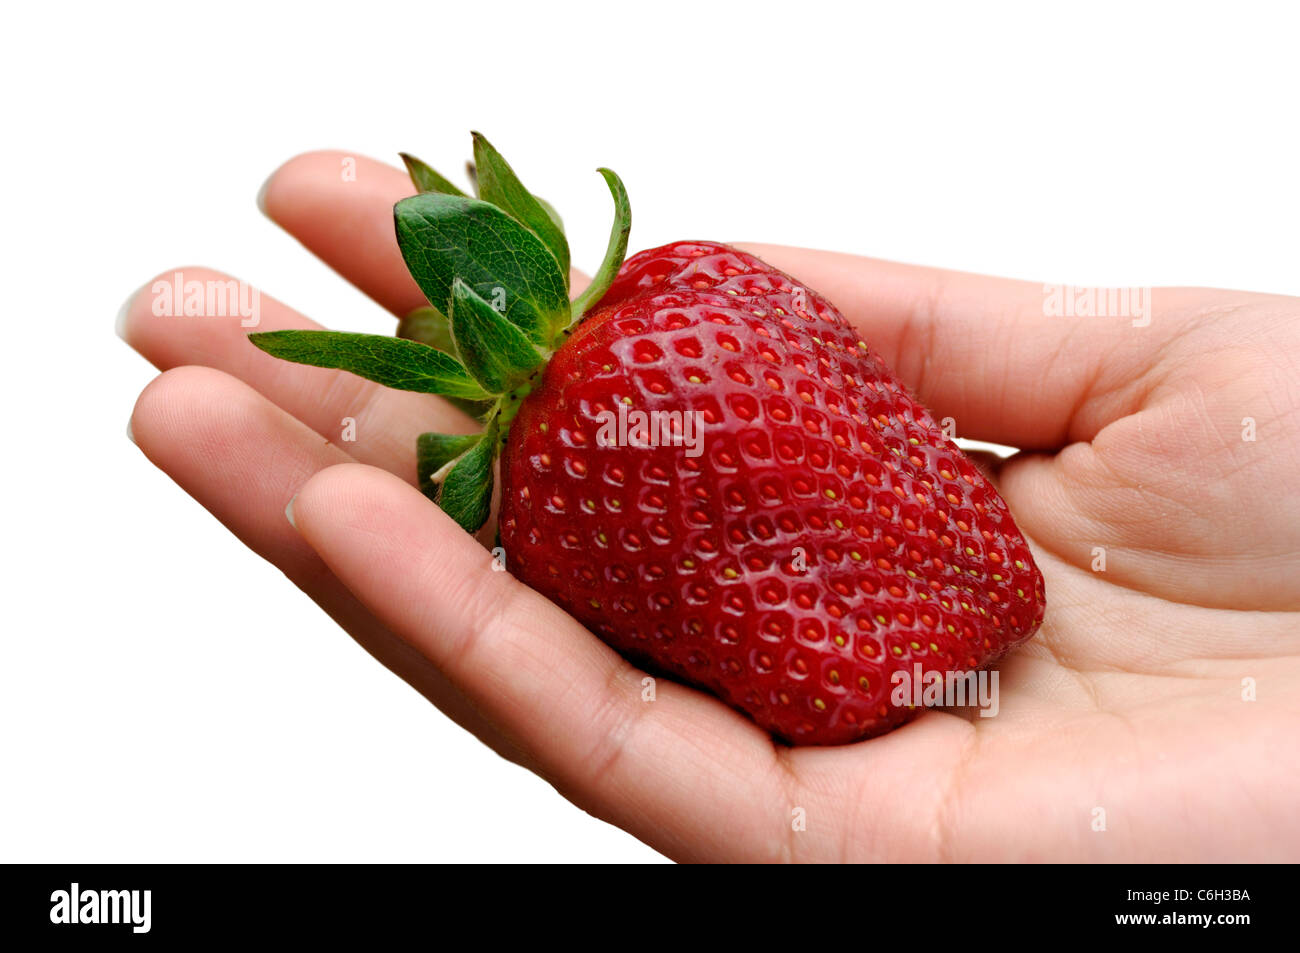 Grande fraise fraîchement cueillis dans une main close-up isolated on white background with clipping path Banque D'Images